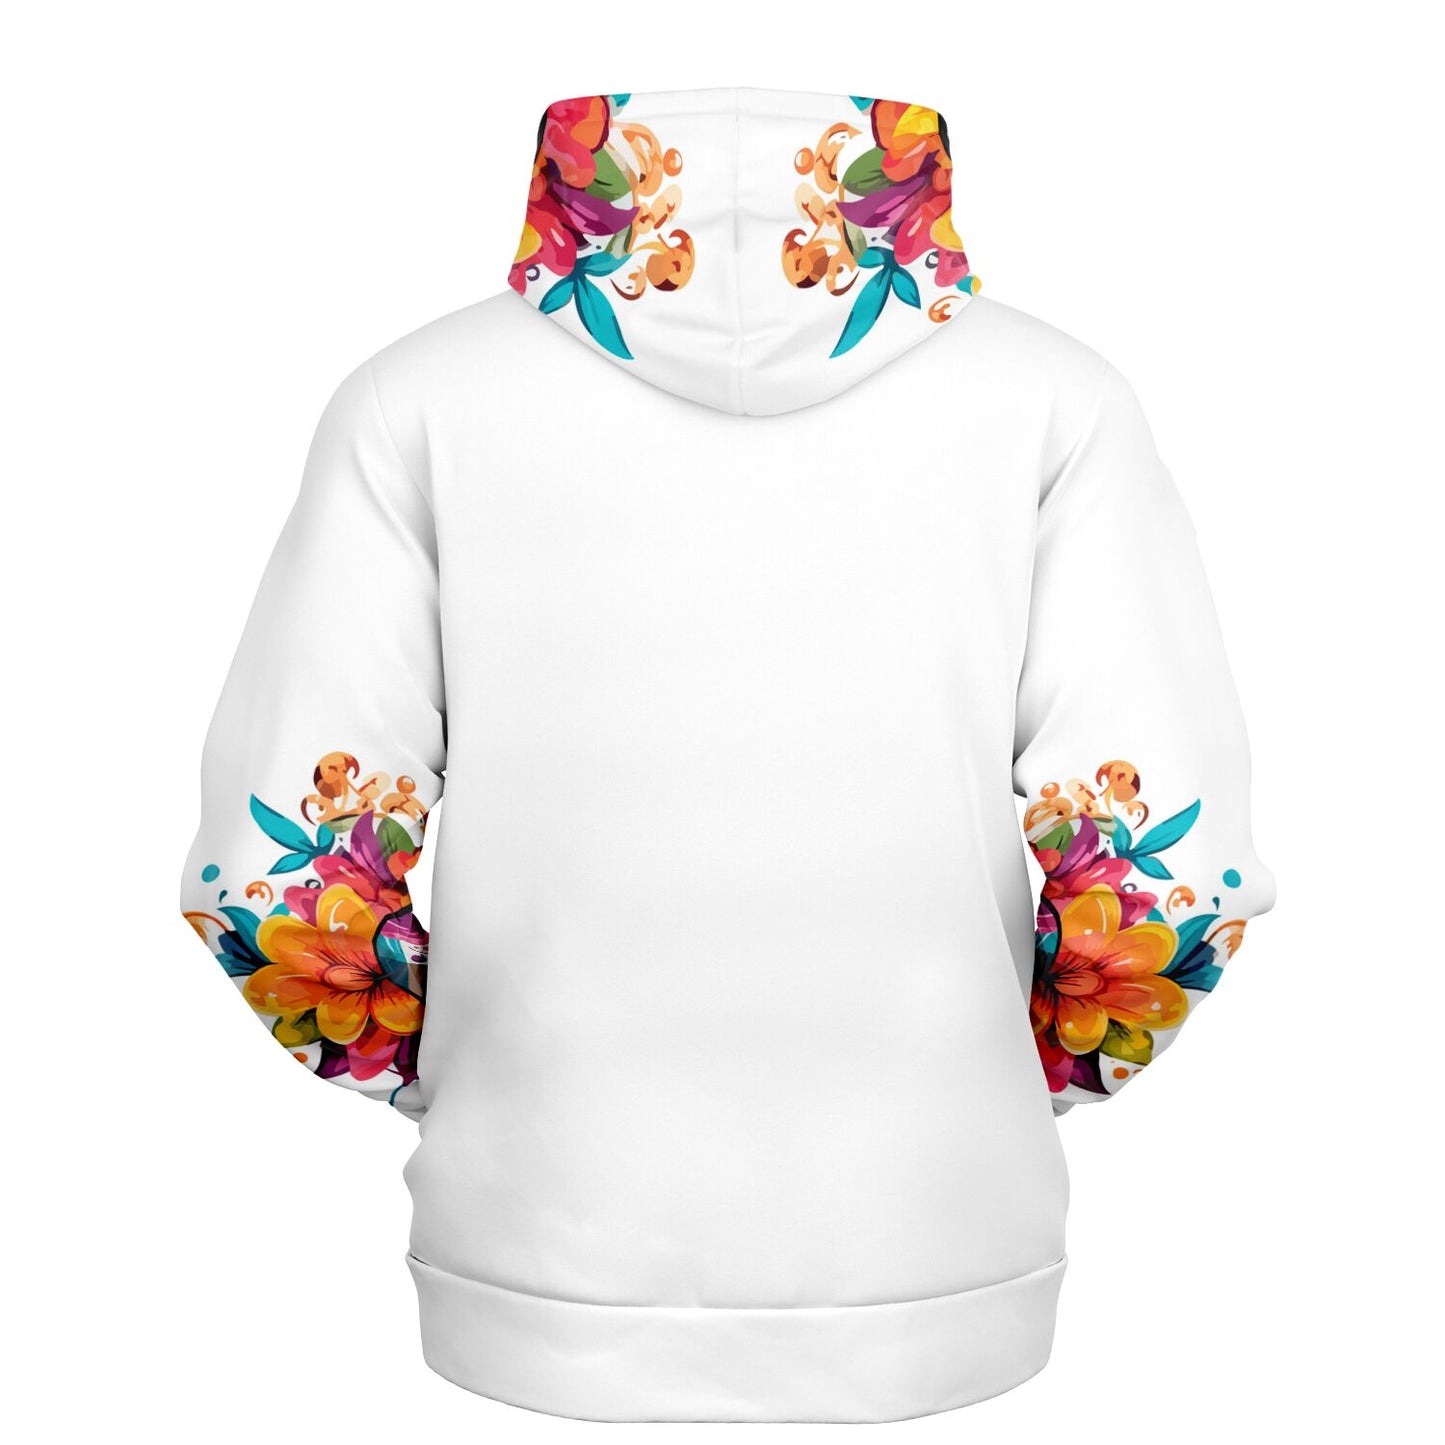 Day of the Dead Skull Hoodie